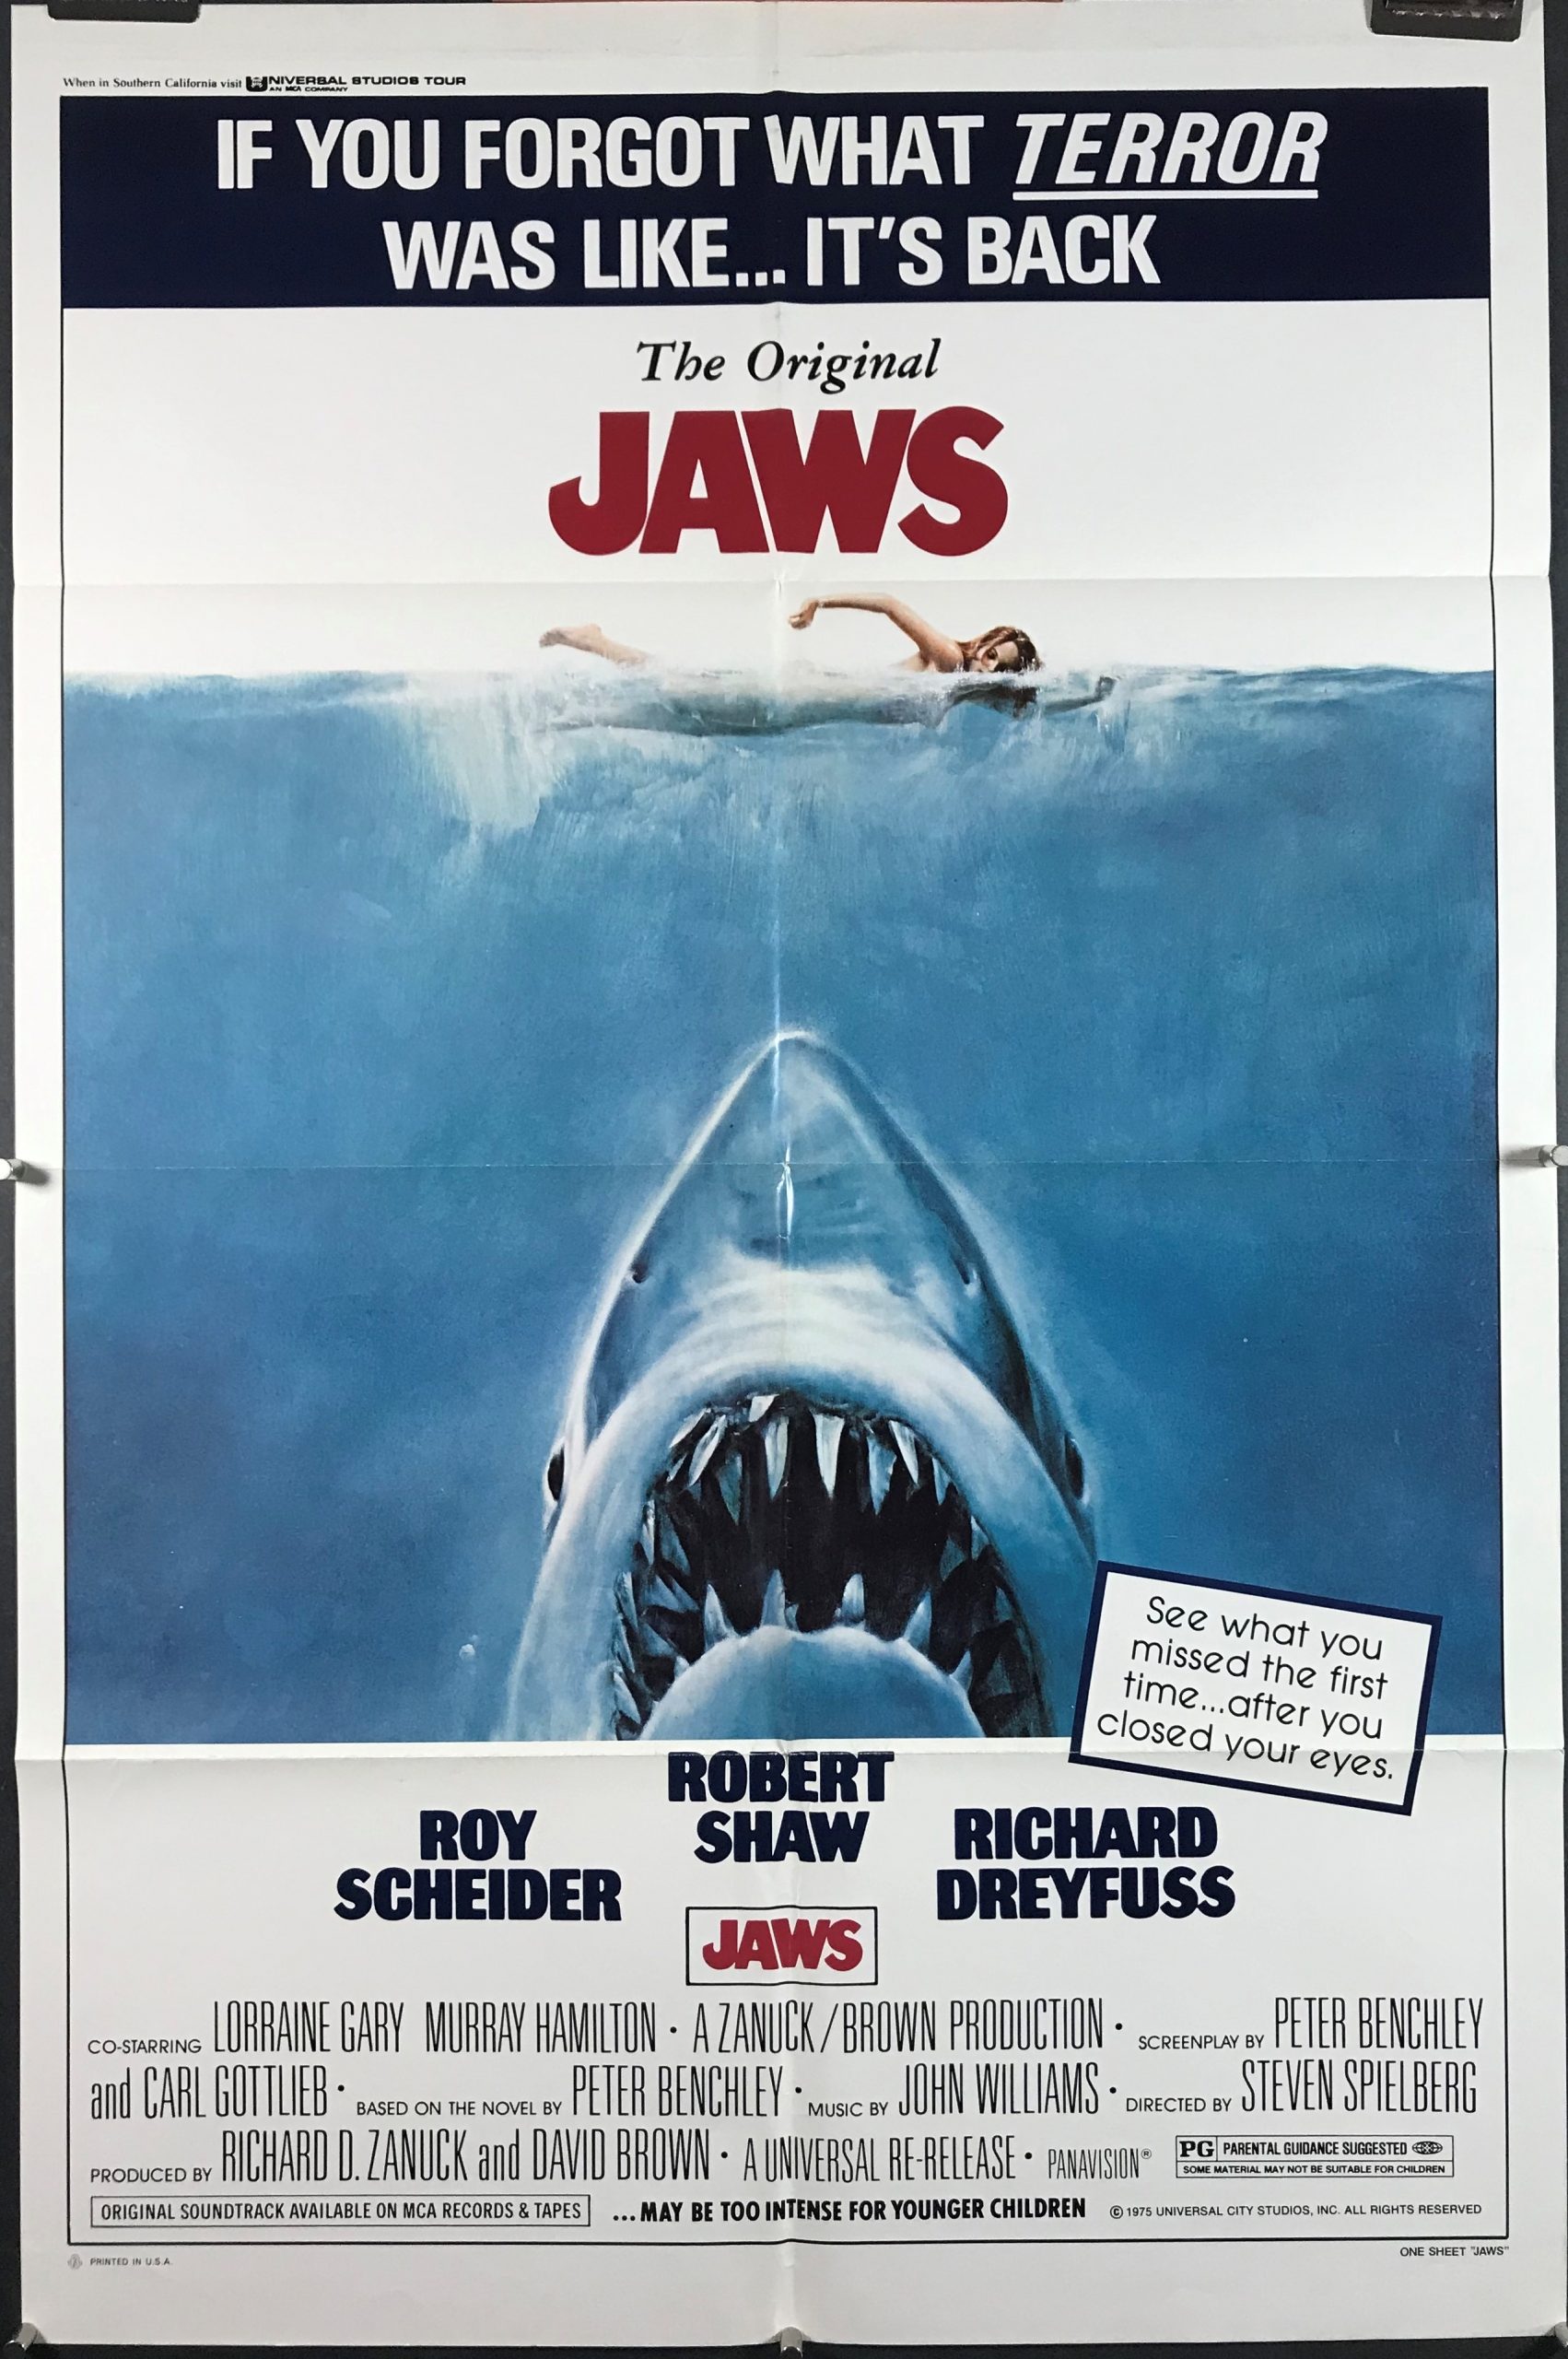 JAWS POSTER-HUGE 70x50 cm-Voted the GREATEST MOVIE POSTER OF ALL TIME-Spielberg